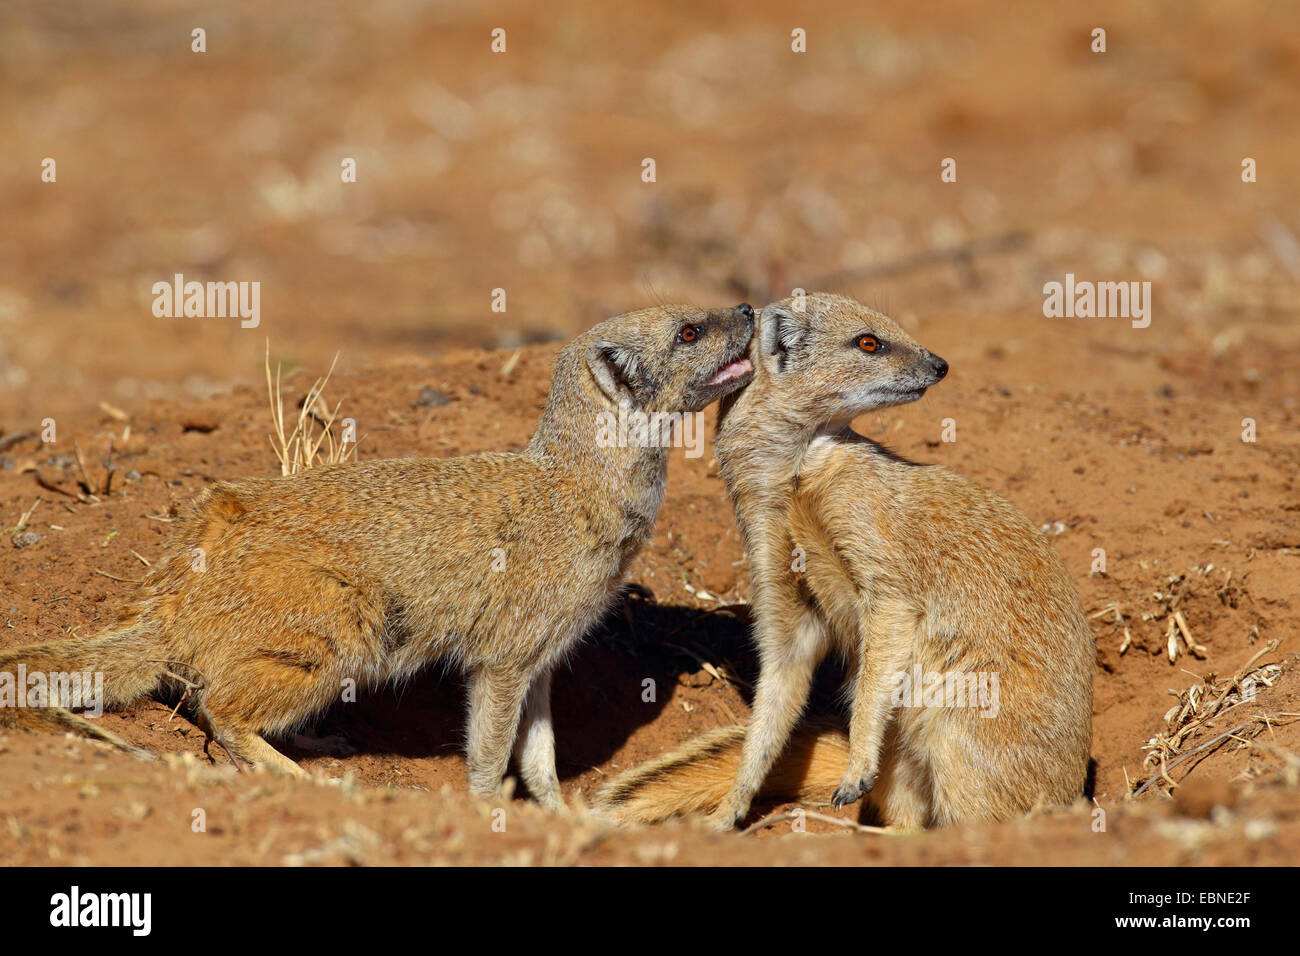 yellow mongoose (Cynictis penicillata), nibbling at the ear of the partner, South Africa, Barberspan Bird Sanctury Stock Photo